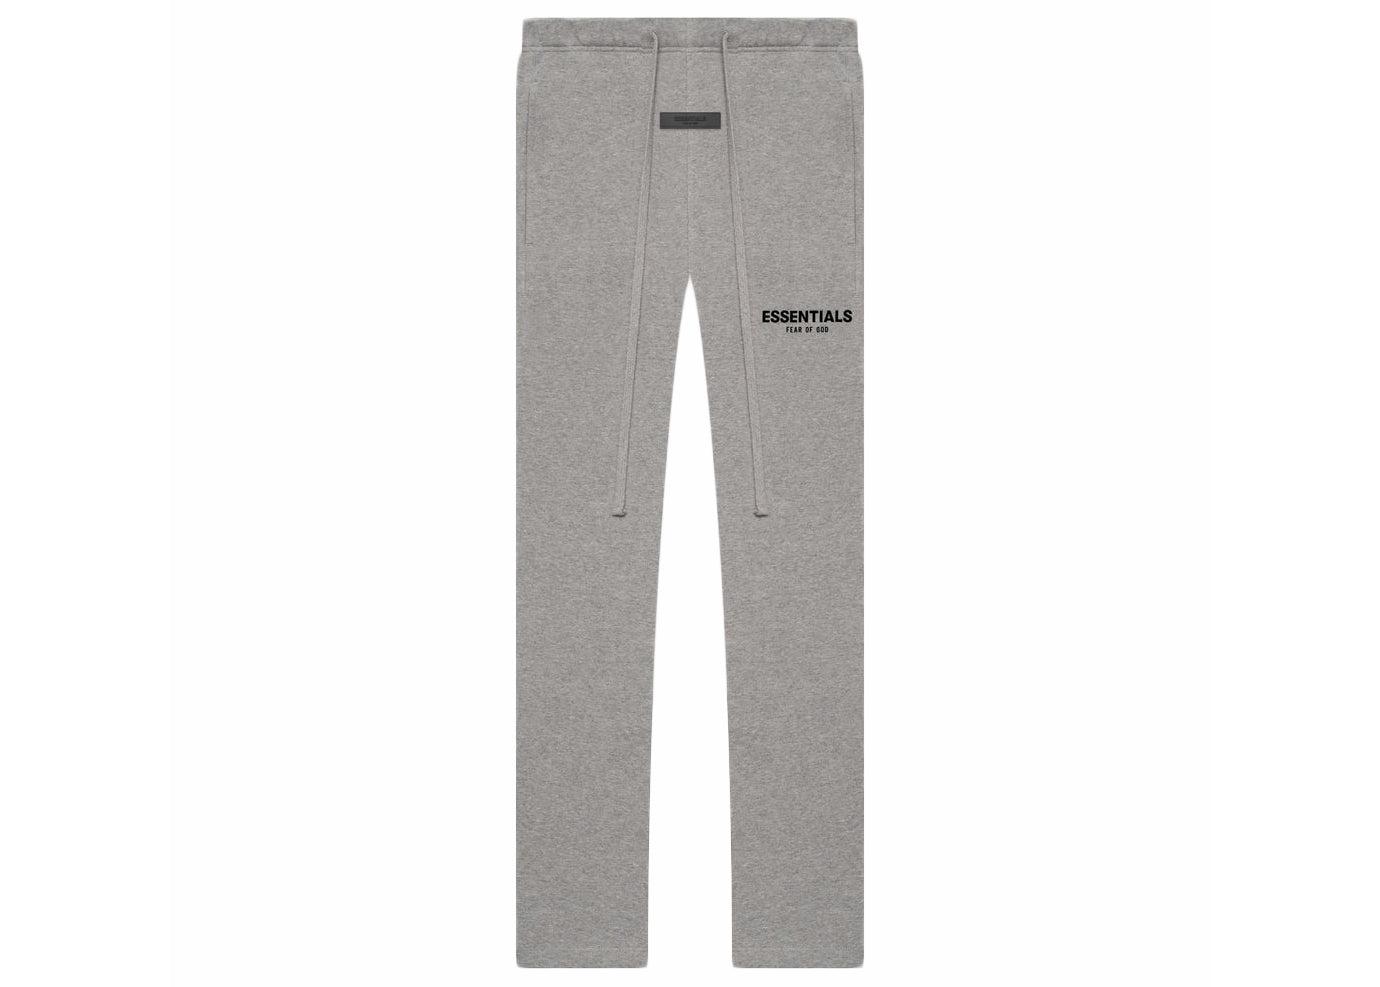 FEAR OF GOD ESSENTIALS RELAXED SWEATPANTS DARK OATMEAL (SS22)